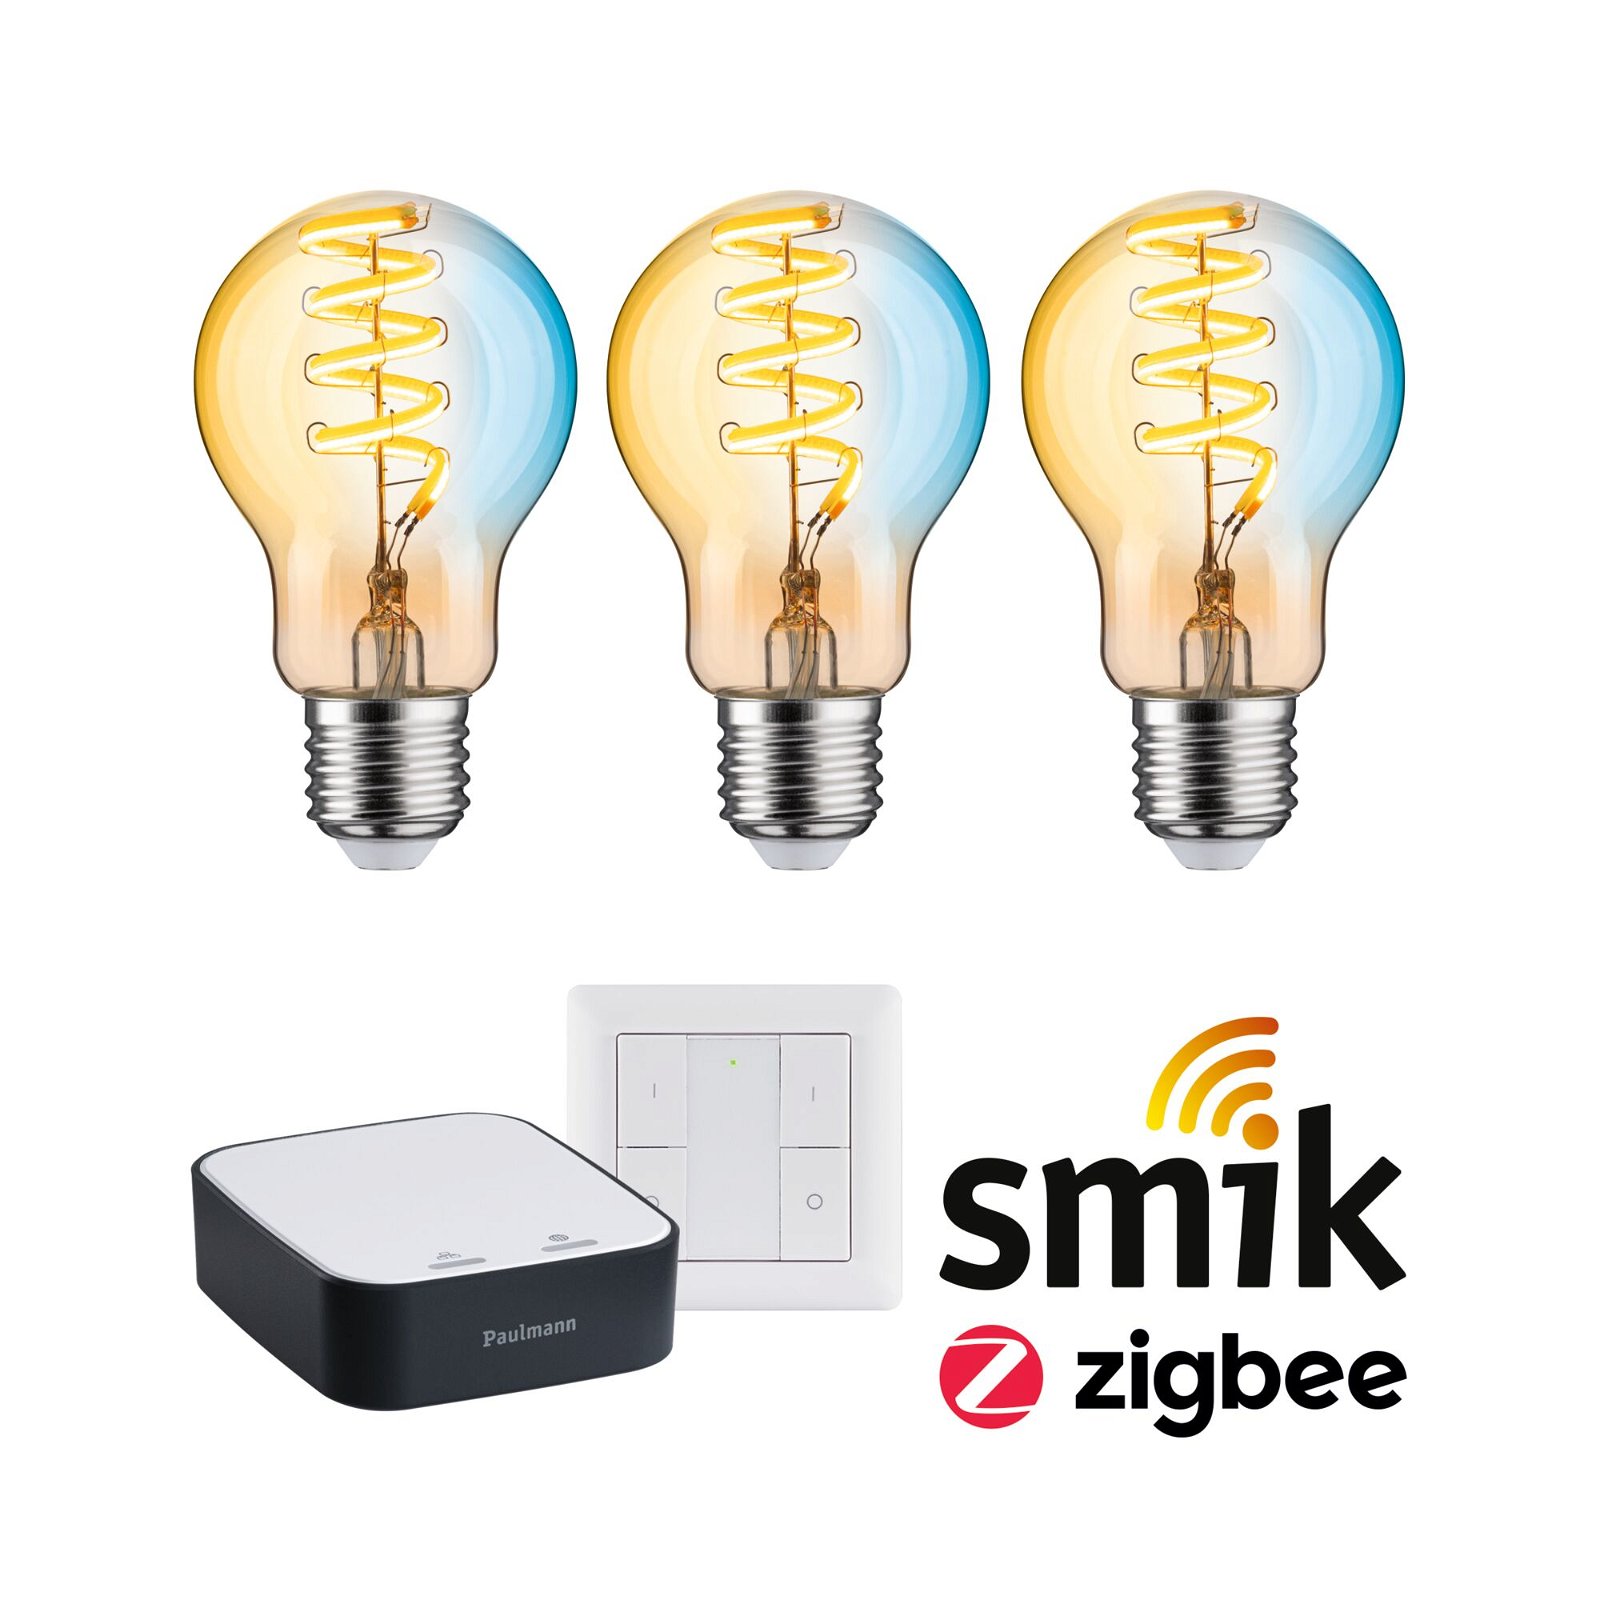 Attractively priced starter set Zigbee 3.0 LED Pear Filament E27 Tunable White + Gateway smik + Switch